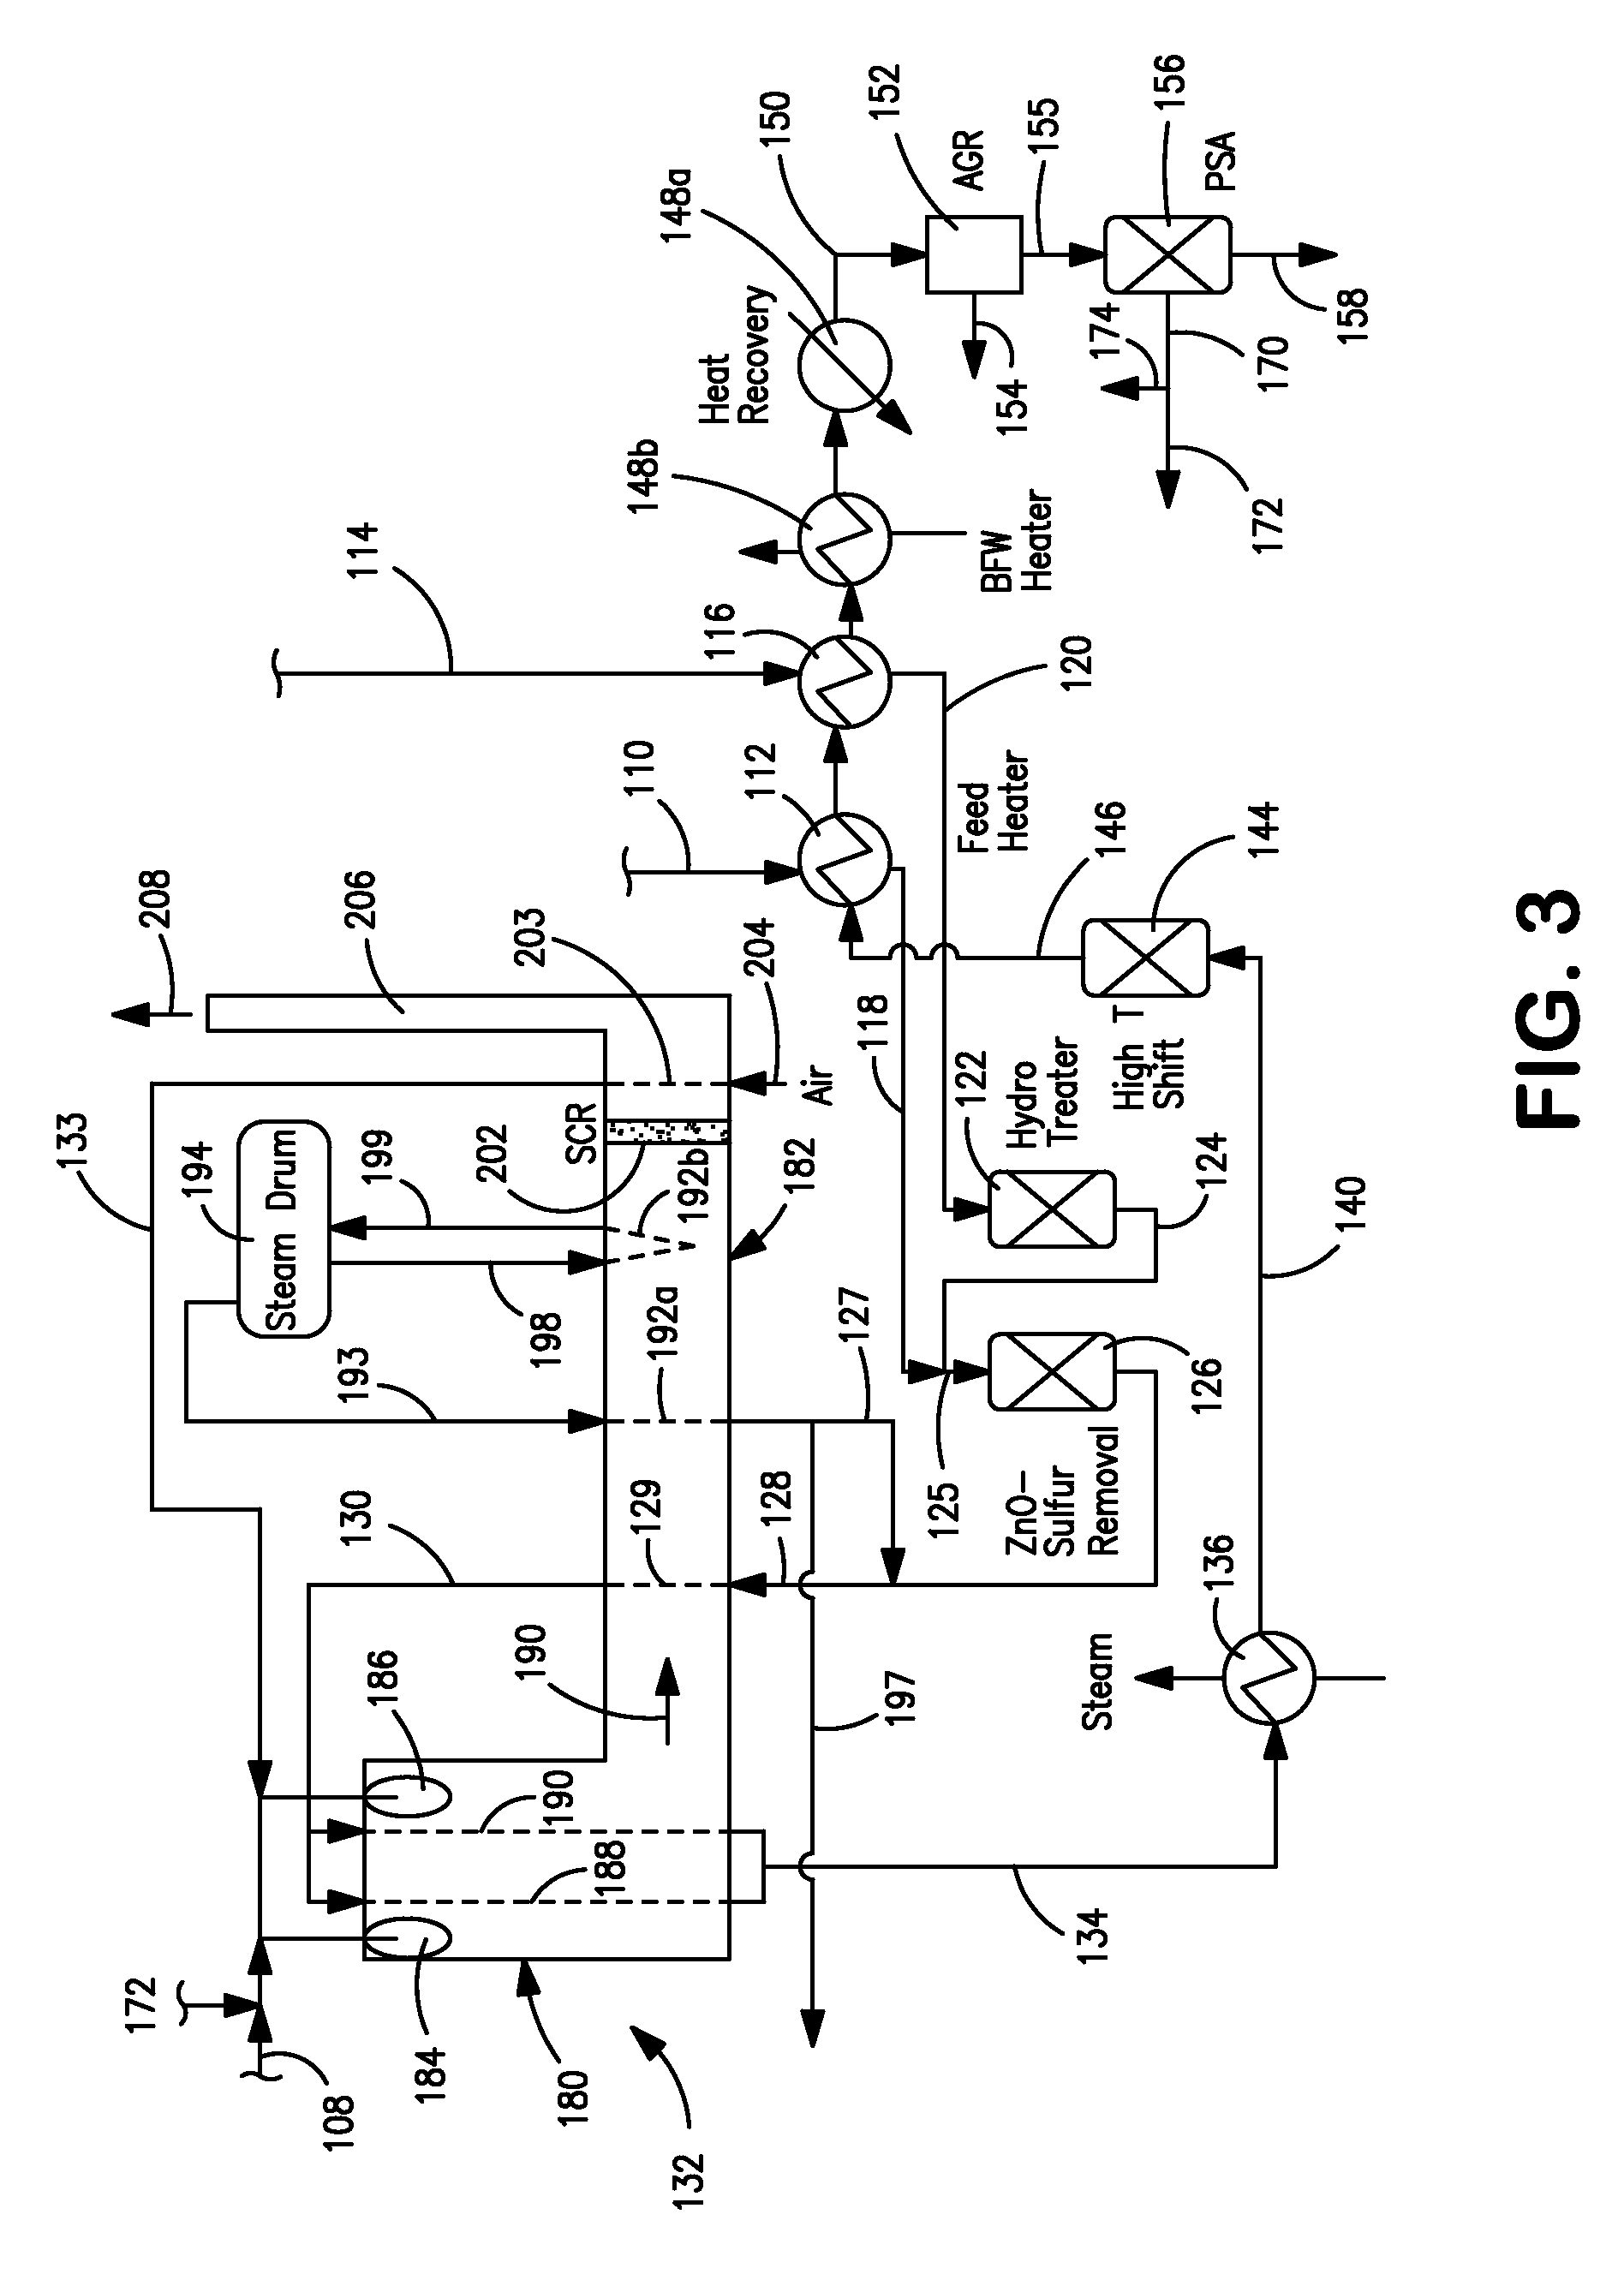 Hydrogen production method and facility